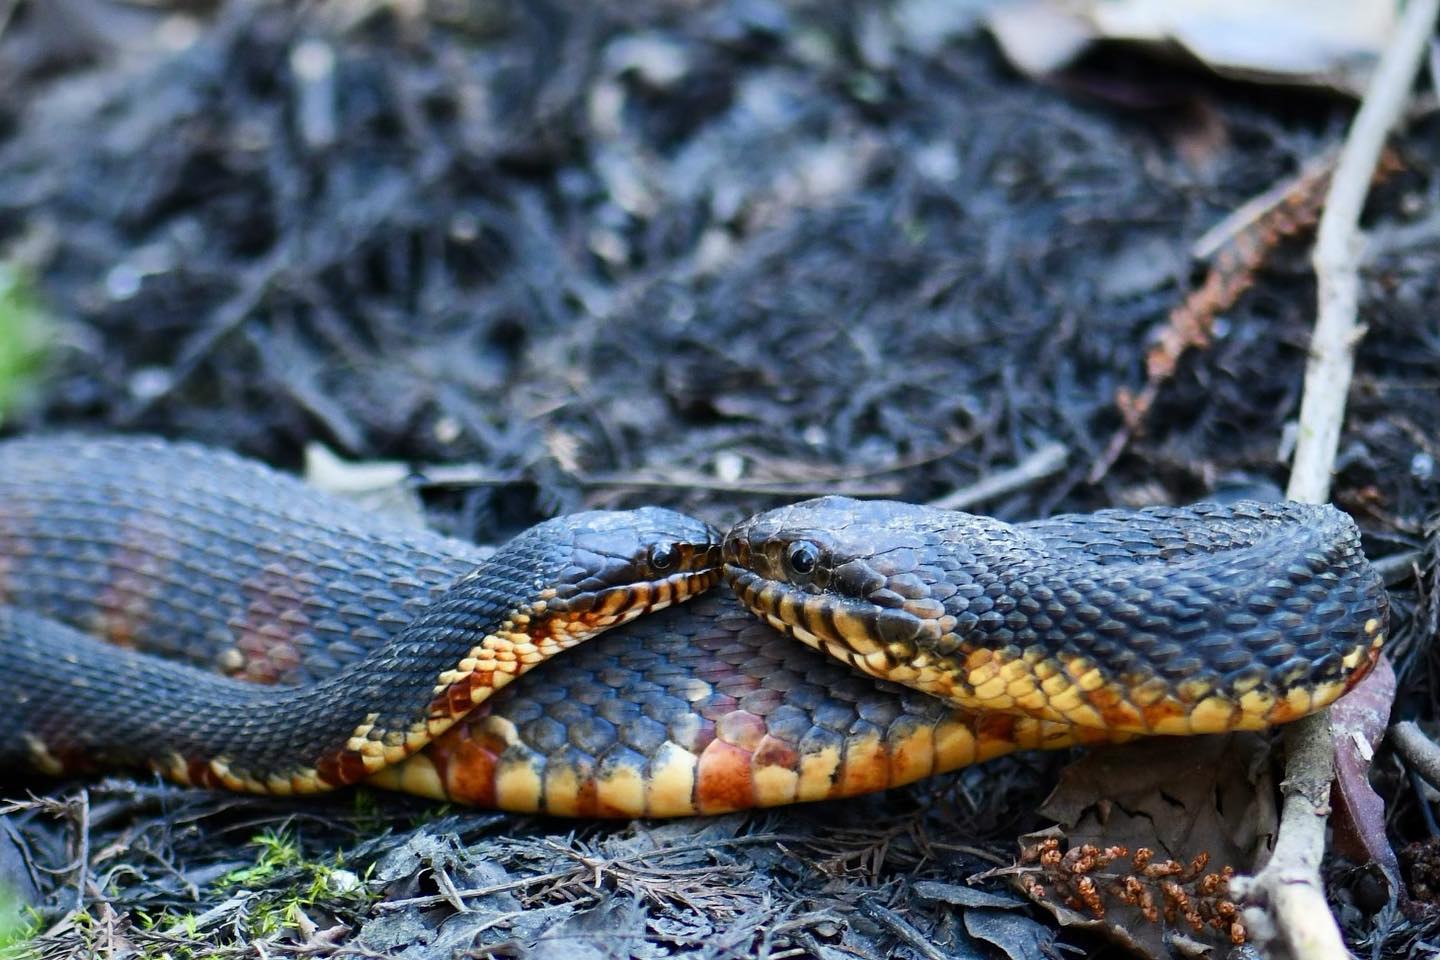 Banded Watersnakes